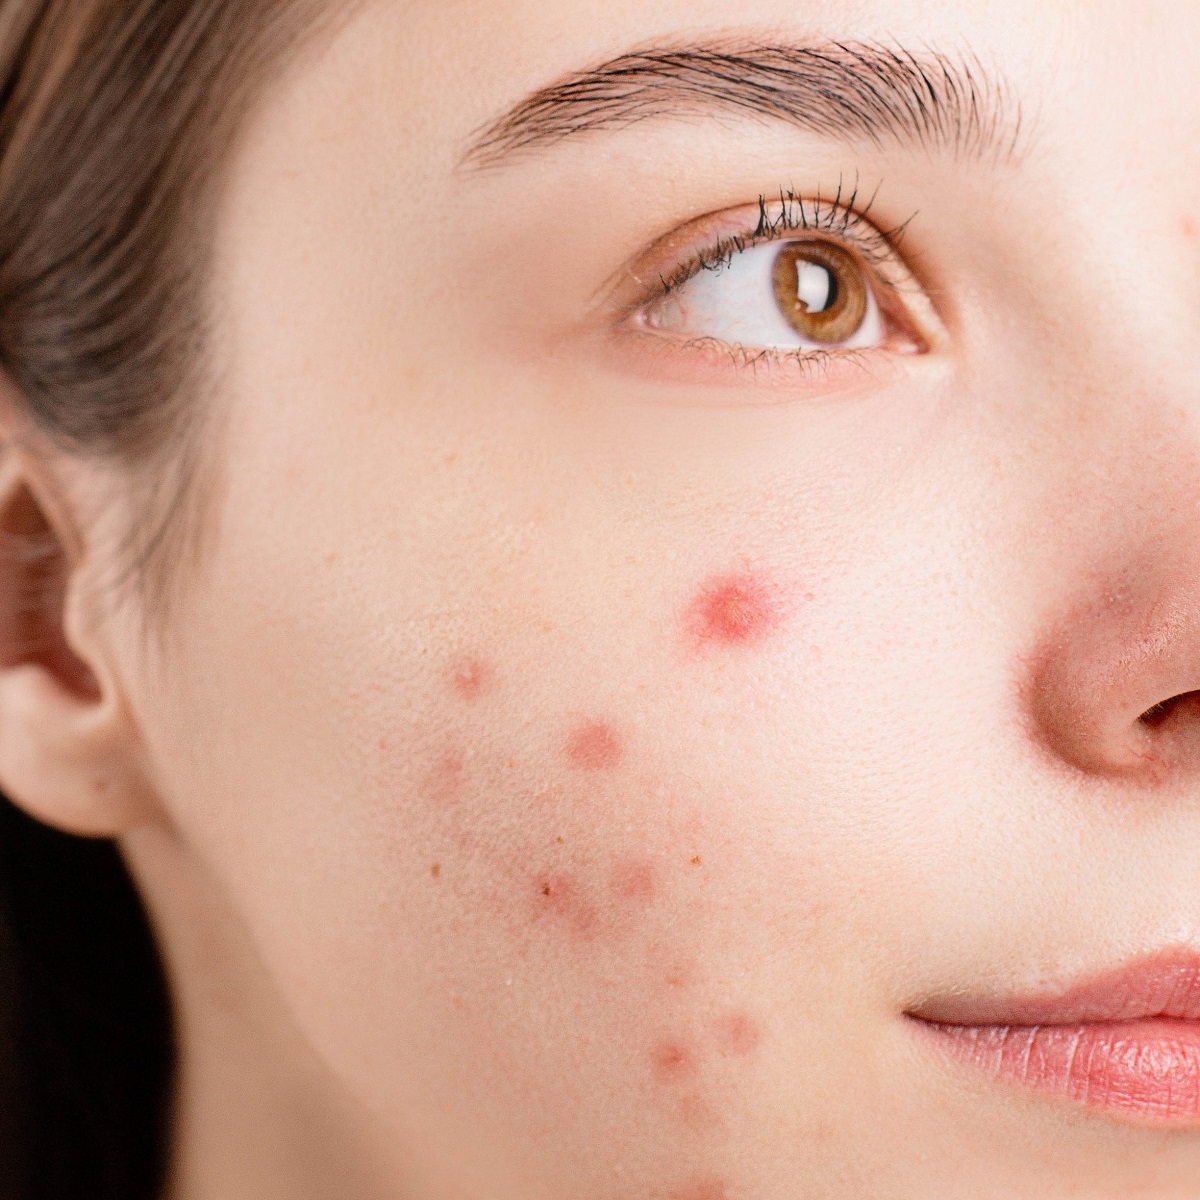 ACNE – Symptoms, Causes, Complications, and Treatment